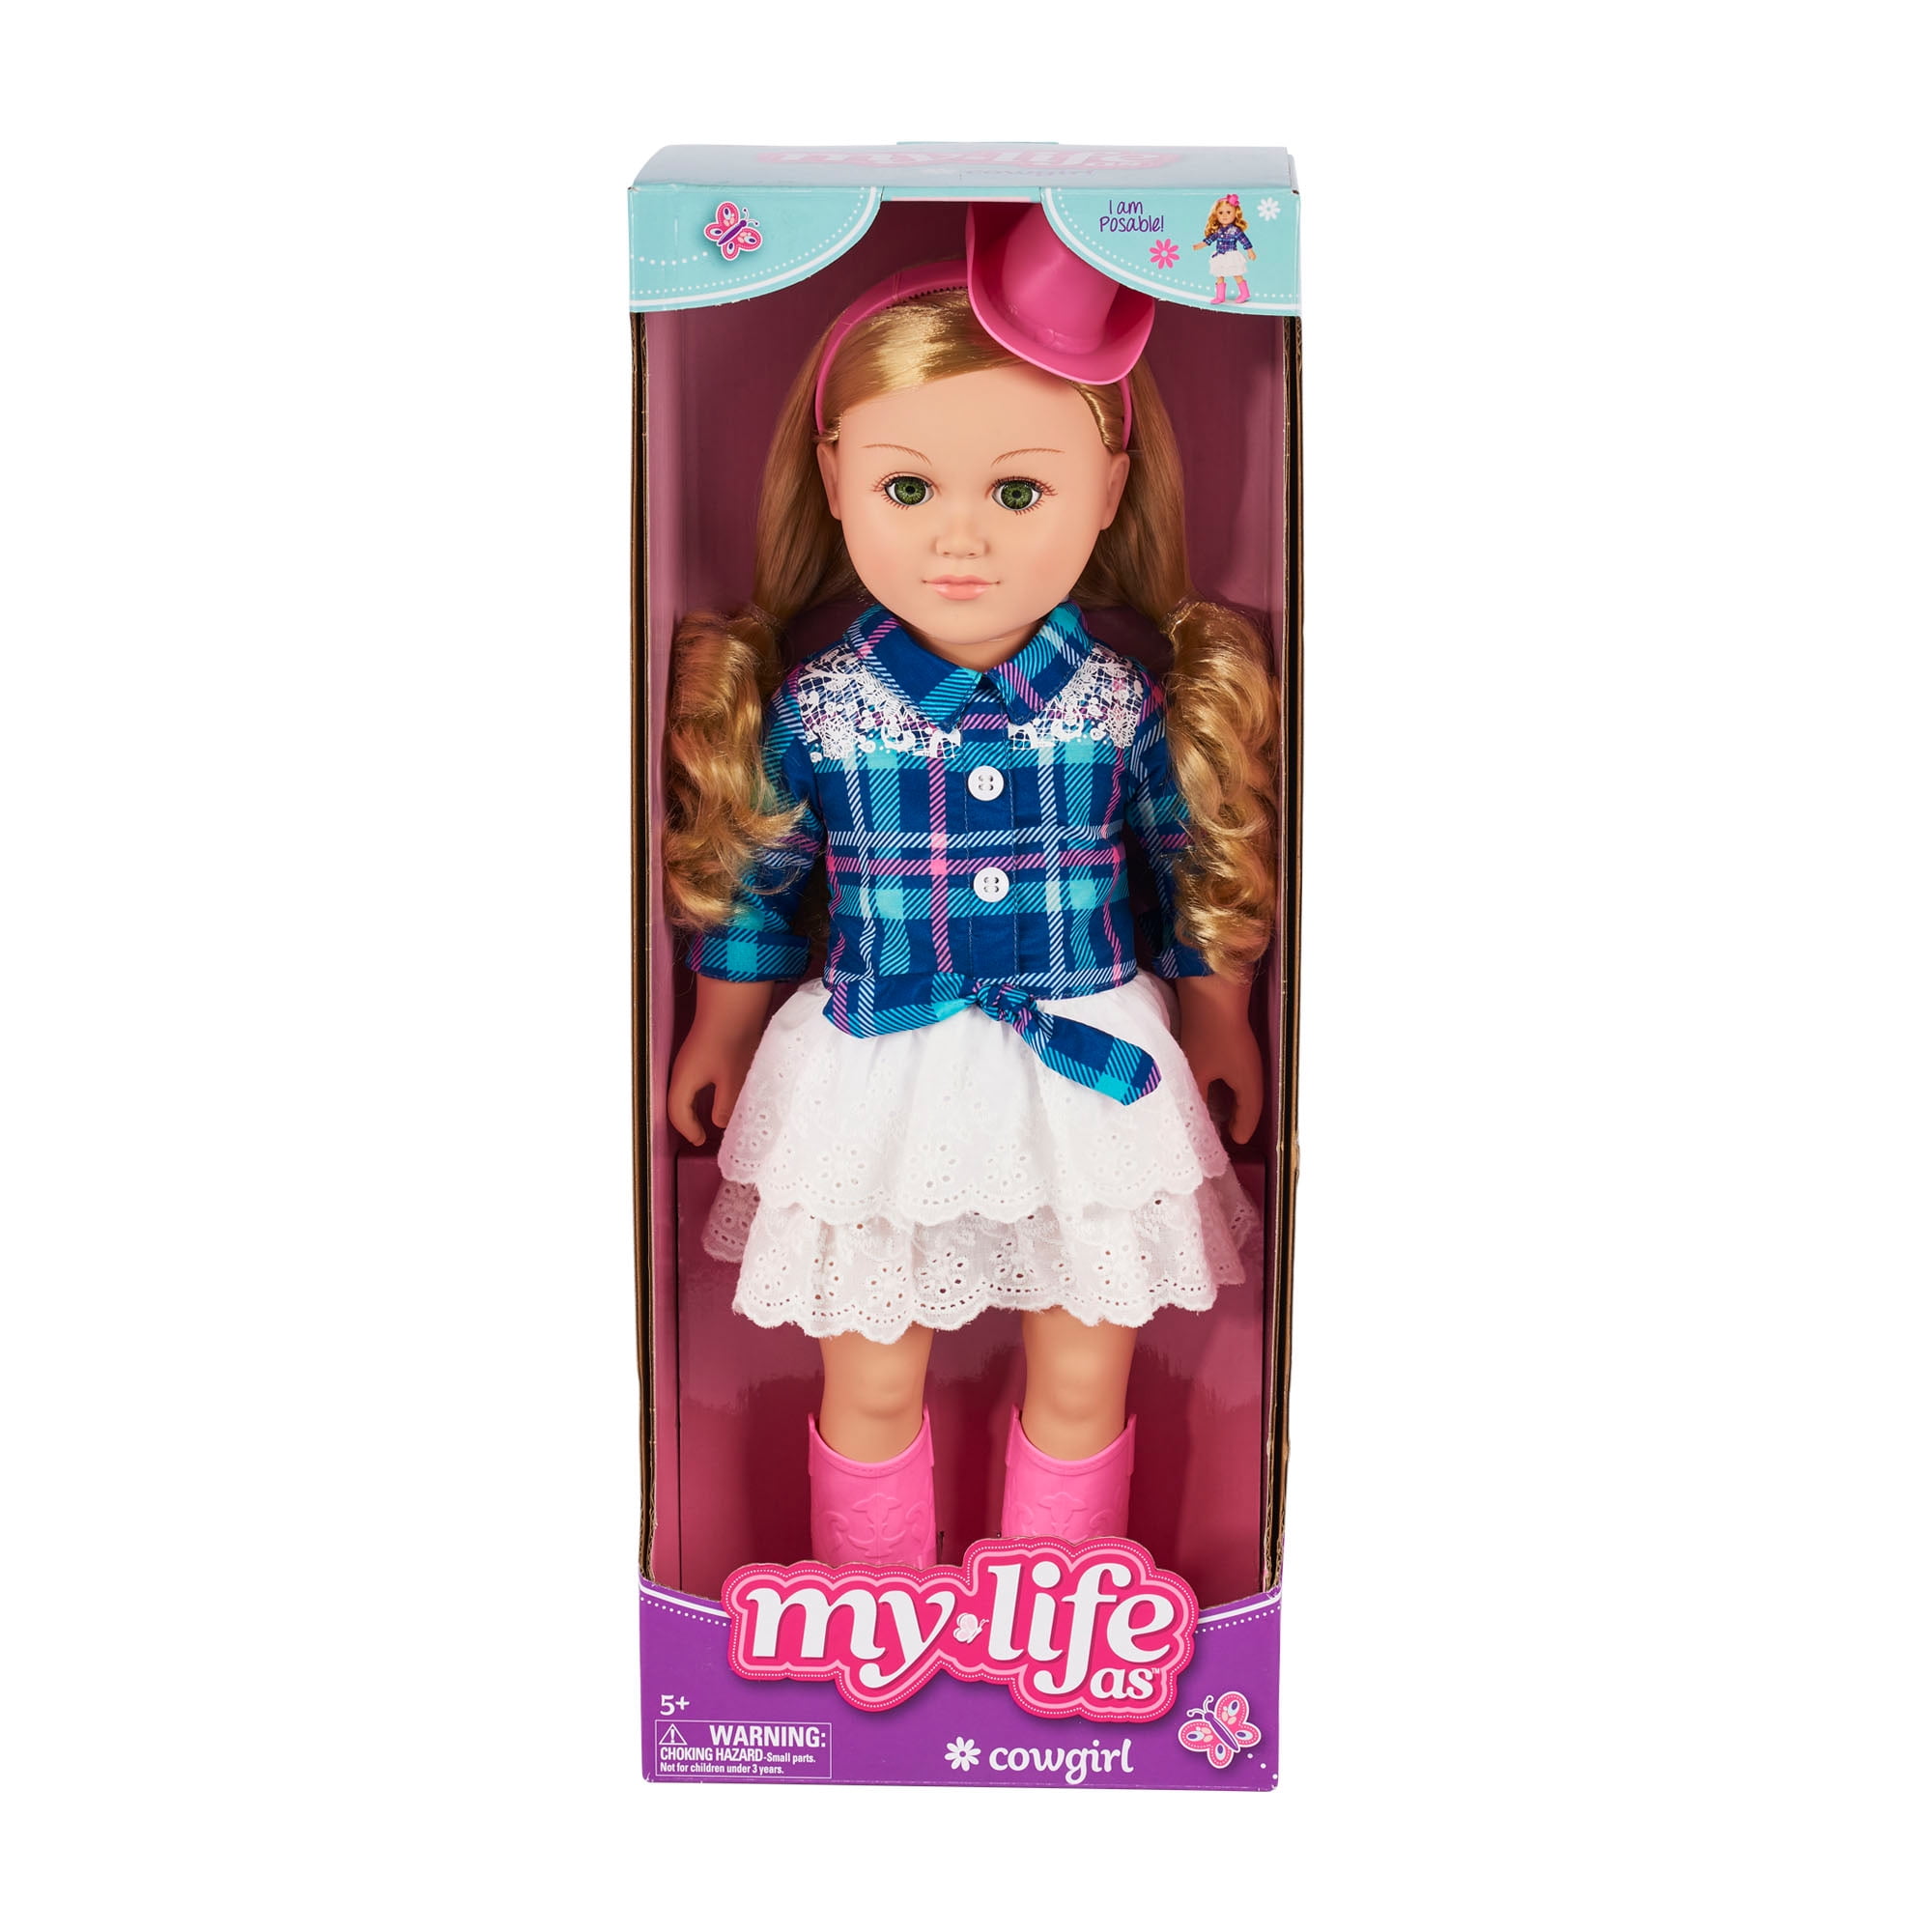 18" COWGIRL DOLL BRUNETTE BLUE EYES MY LIFE AS